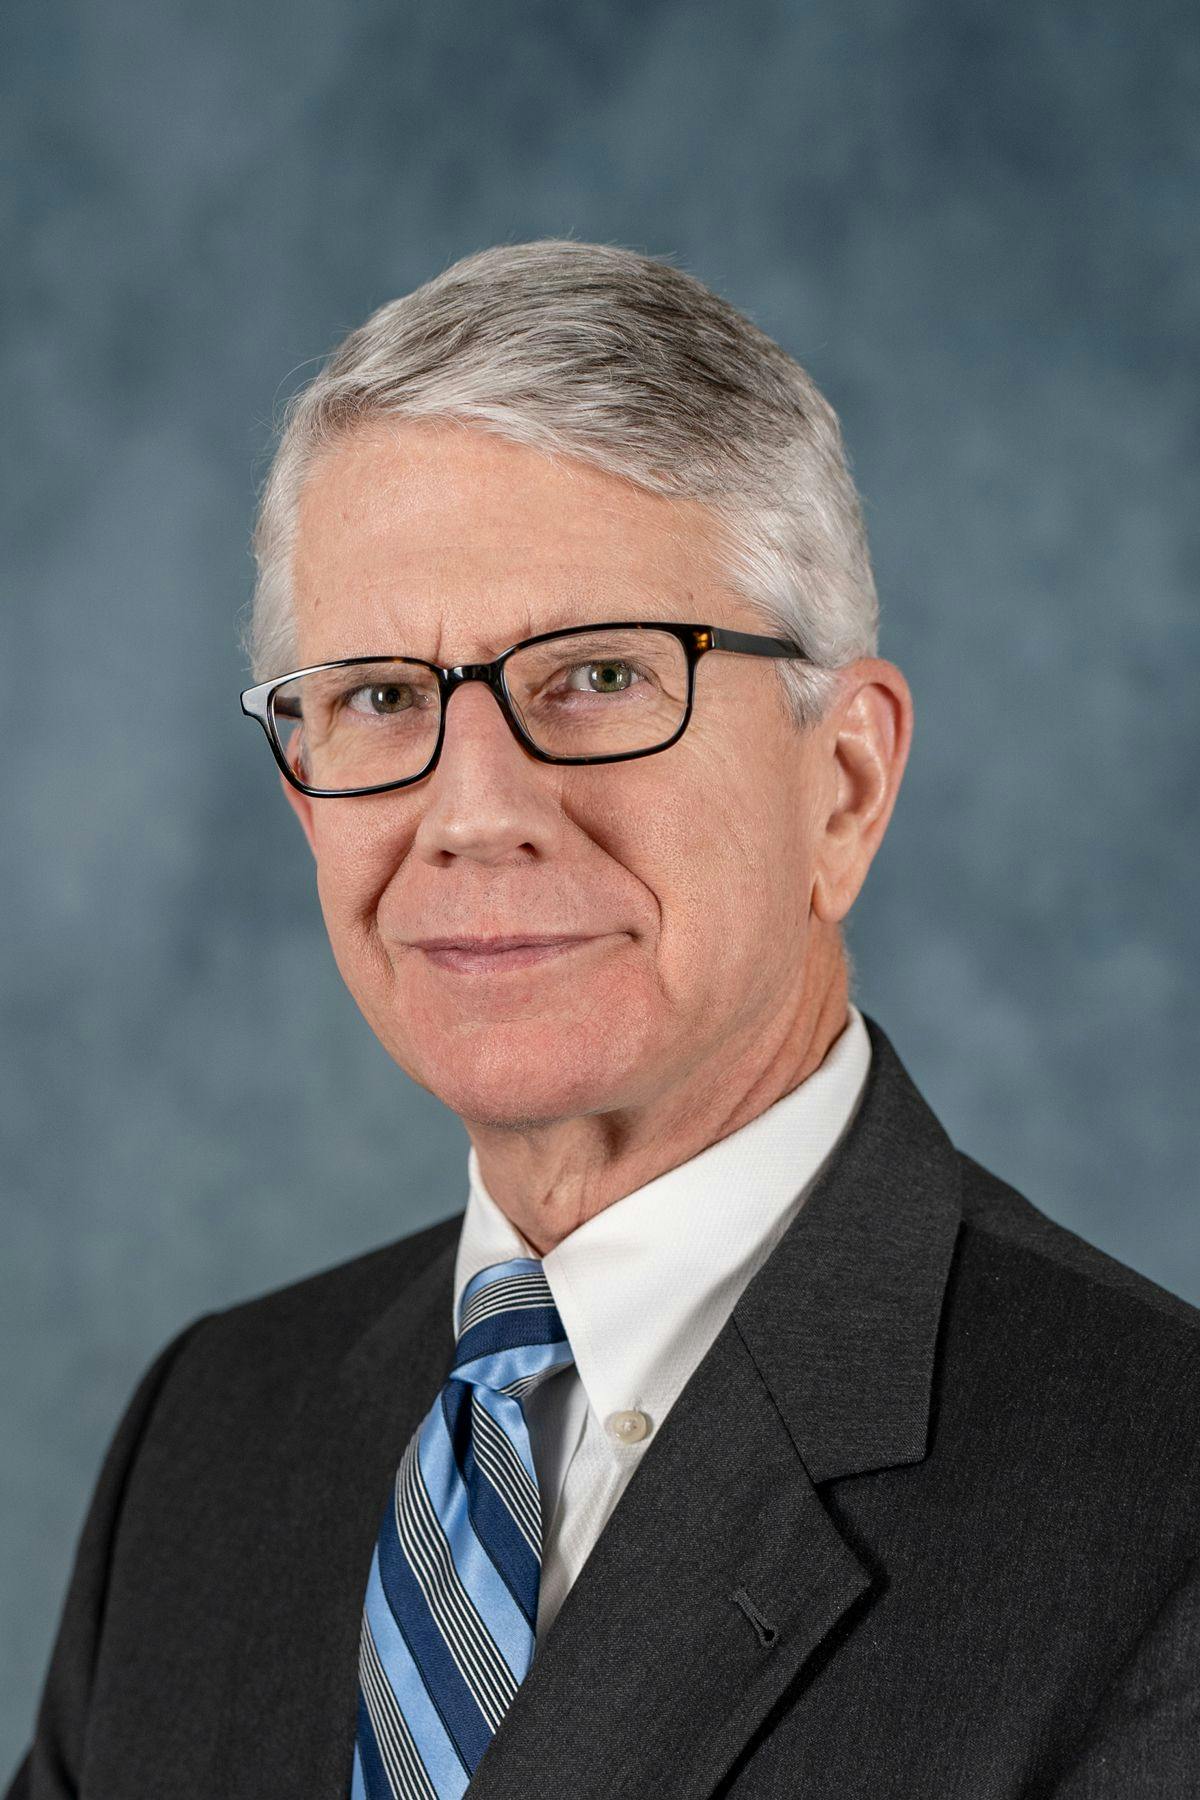 Andy Carter, CEO and president of the Hospital and Healthsystem Association of Pennsylvania, is retiring June 30. He says hospital leaders must be more nimble and display more business acumen than in the past. (Photo: HAP)